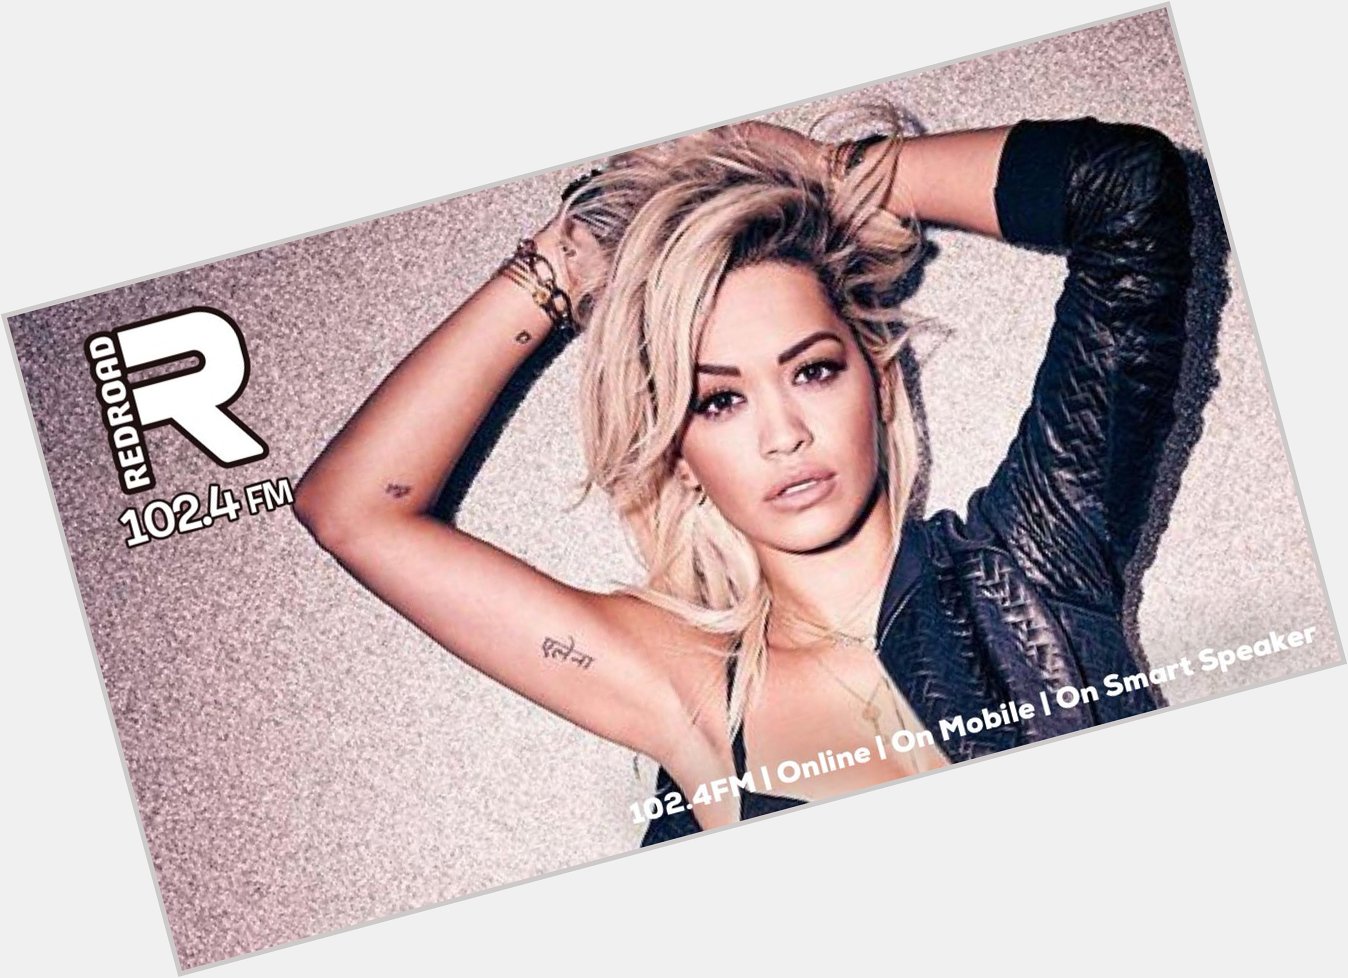 Happy Birthday Rita Ora! The singer is 30 today, what s your fave Rita Ora song? 